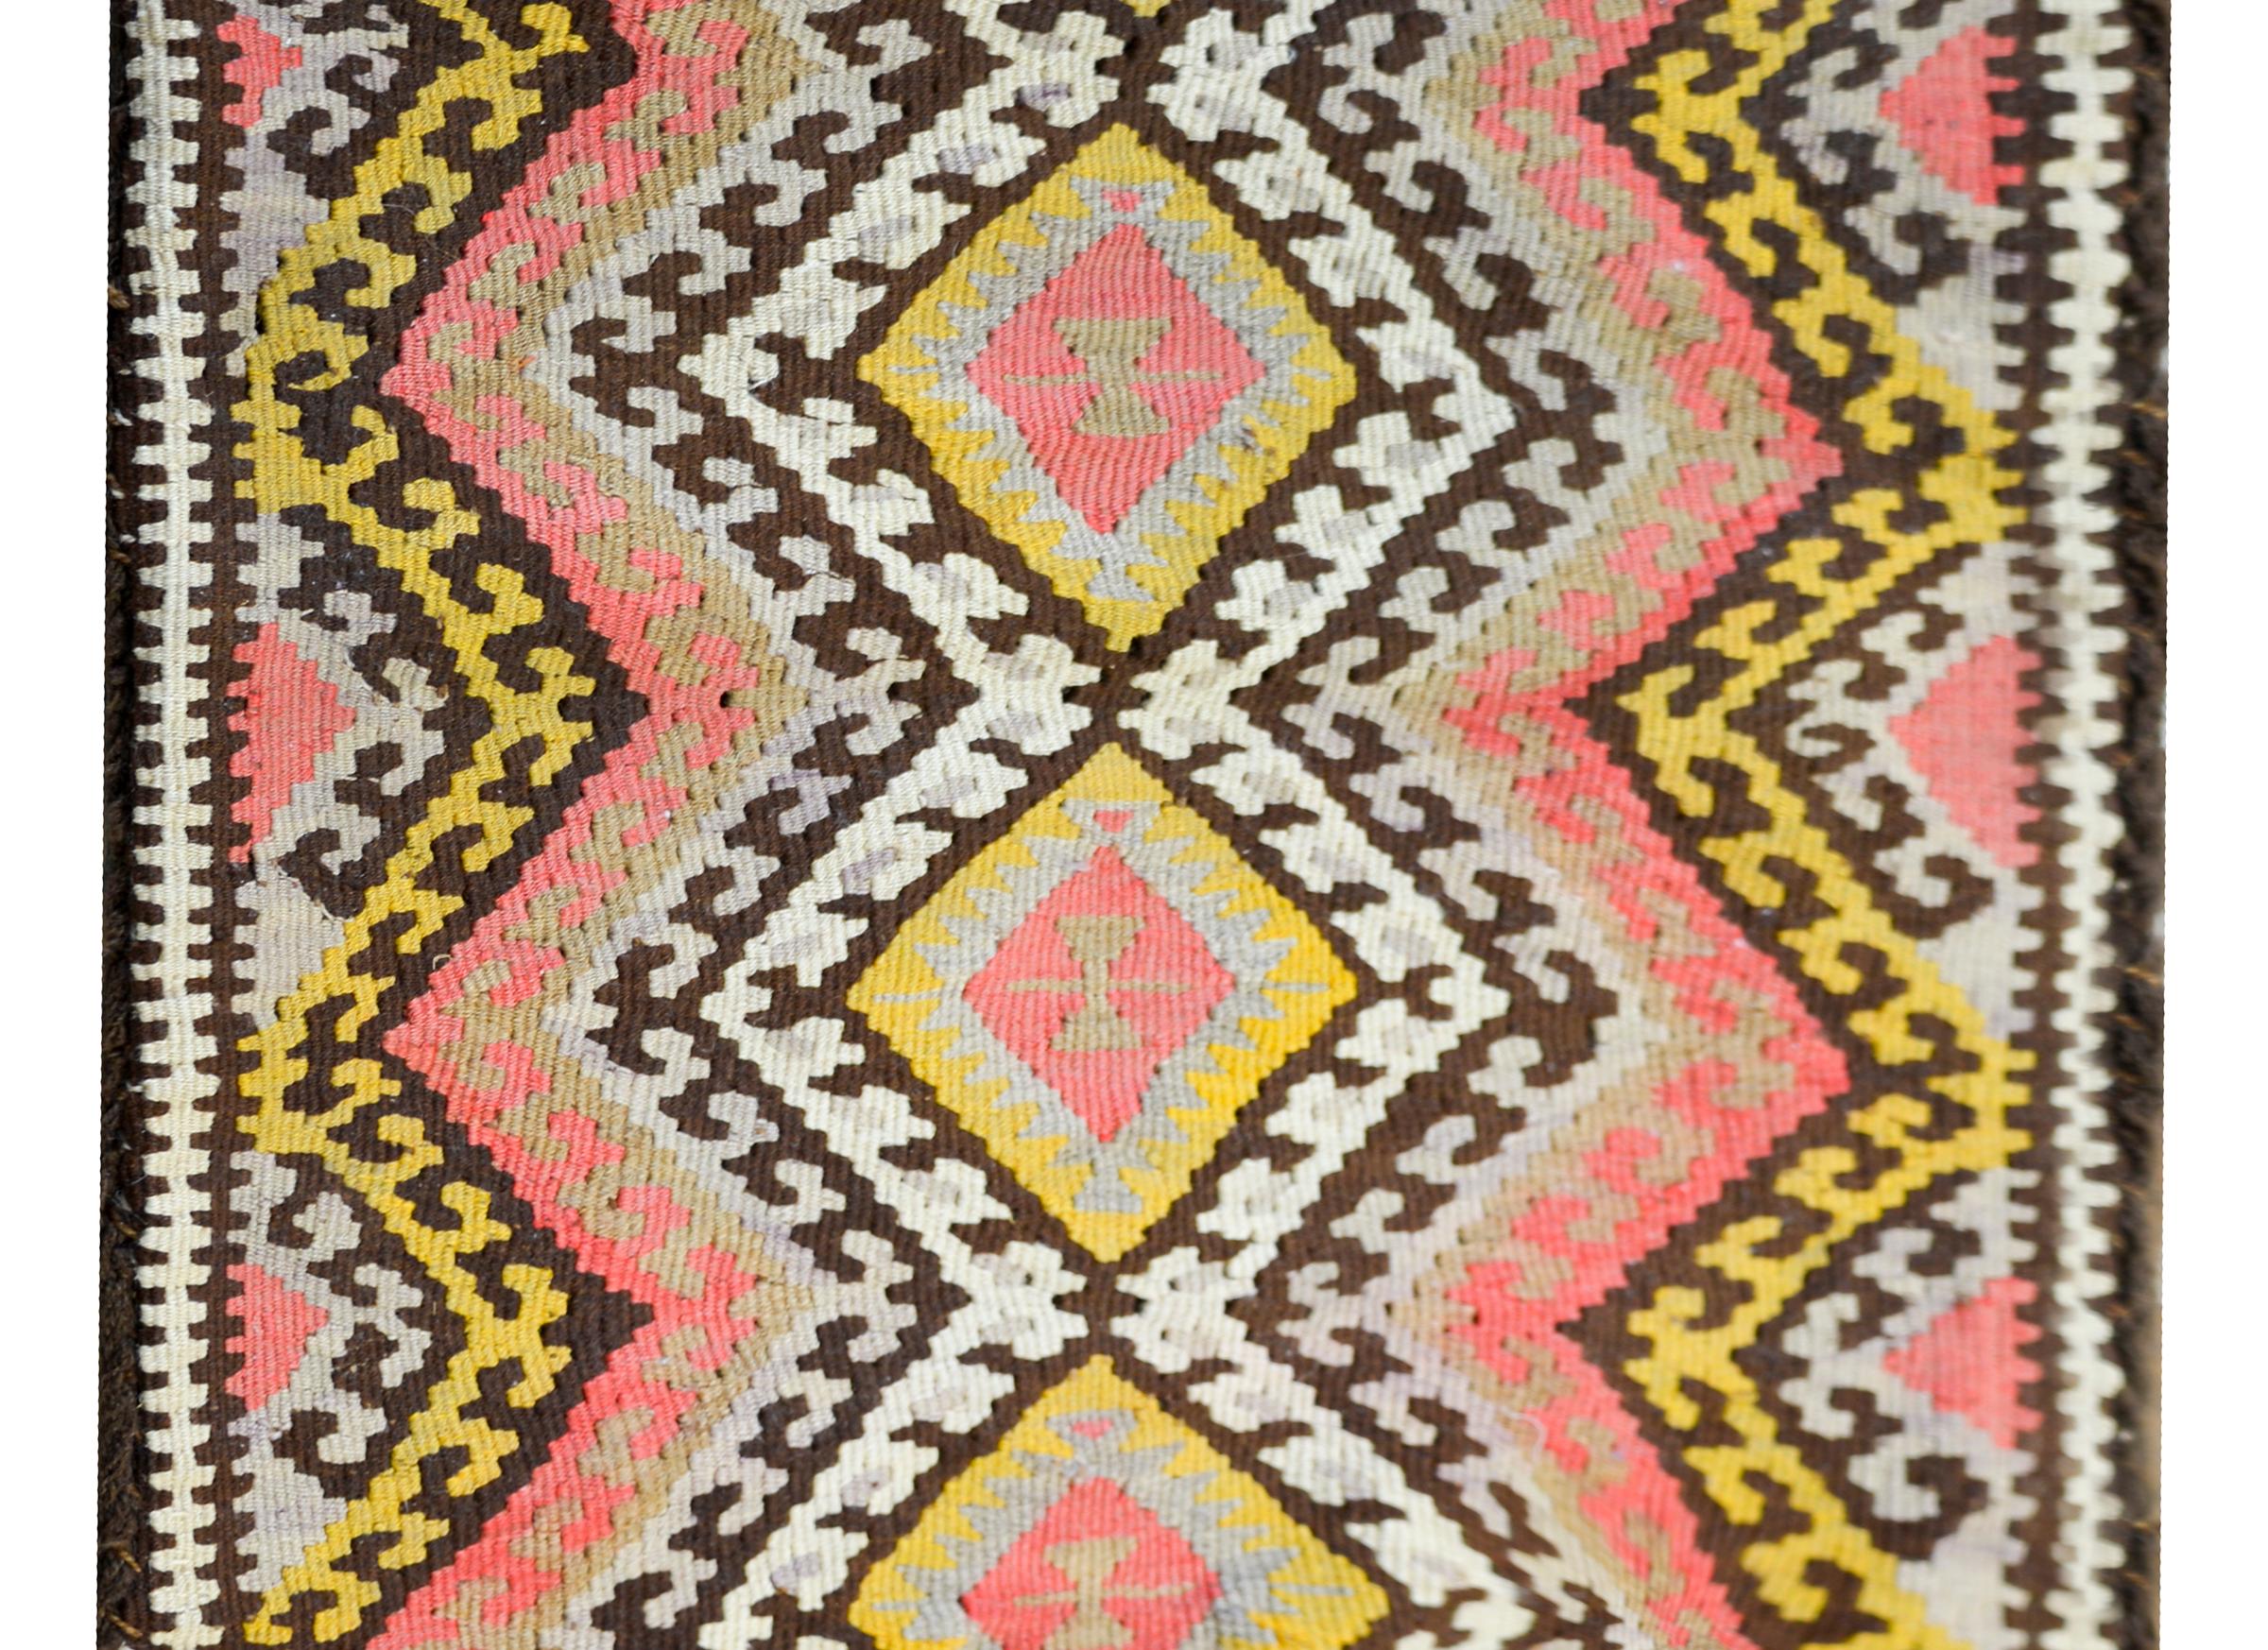 A striking mid-20th century Persian kilim rug that once lived its life as a bag. The pattern contains four diamond medallions flanked by several bold geometric multi-colored zigzag stripes. Fill with pillow inserts and it becomes a large floor or